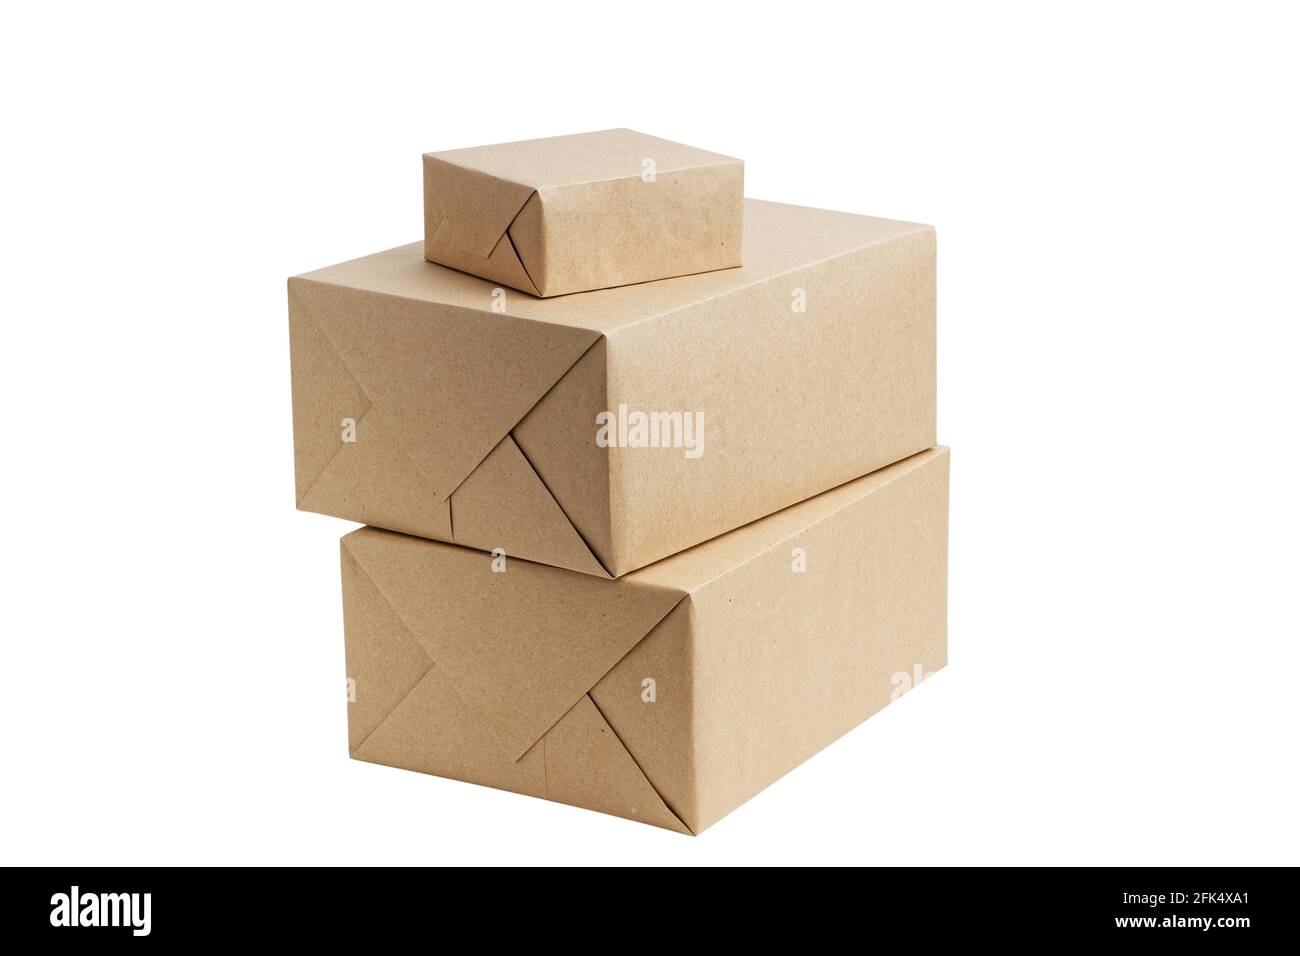 Closed brown cardboard boxes wrapped in kraft paper without label. Box for parcel, delivery or packaging isolated on white background. Stock Photo